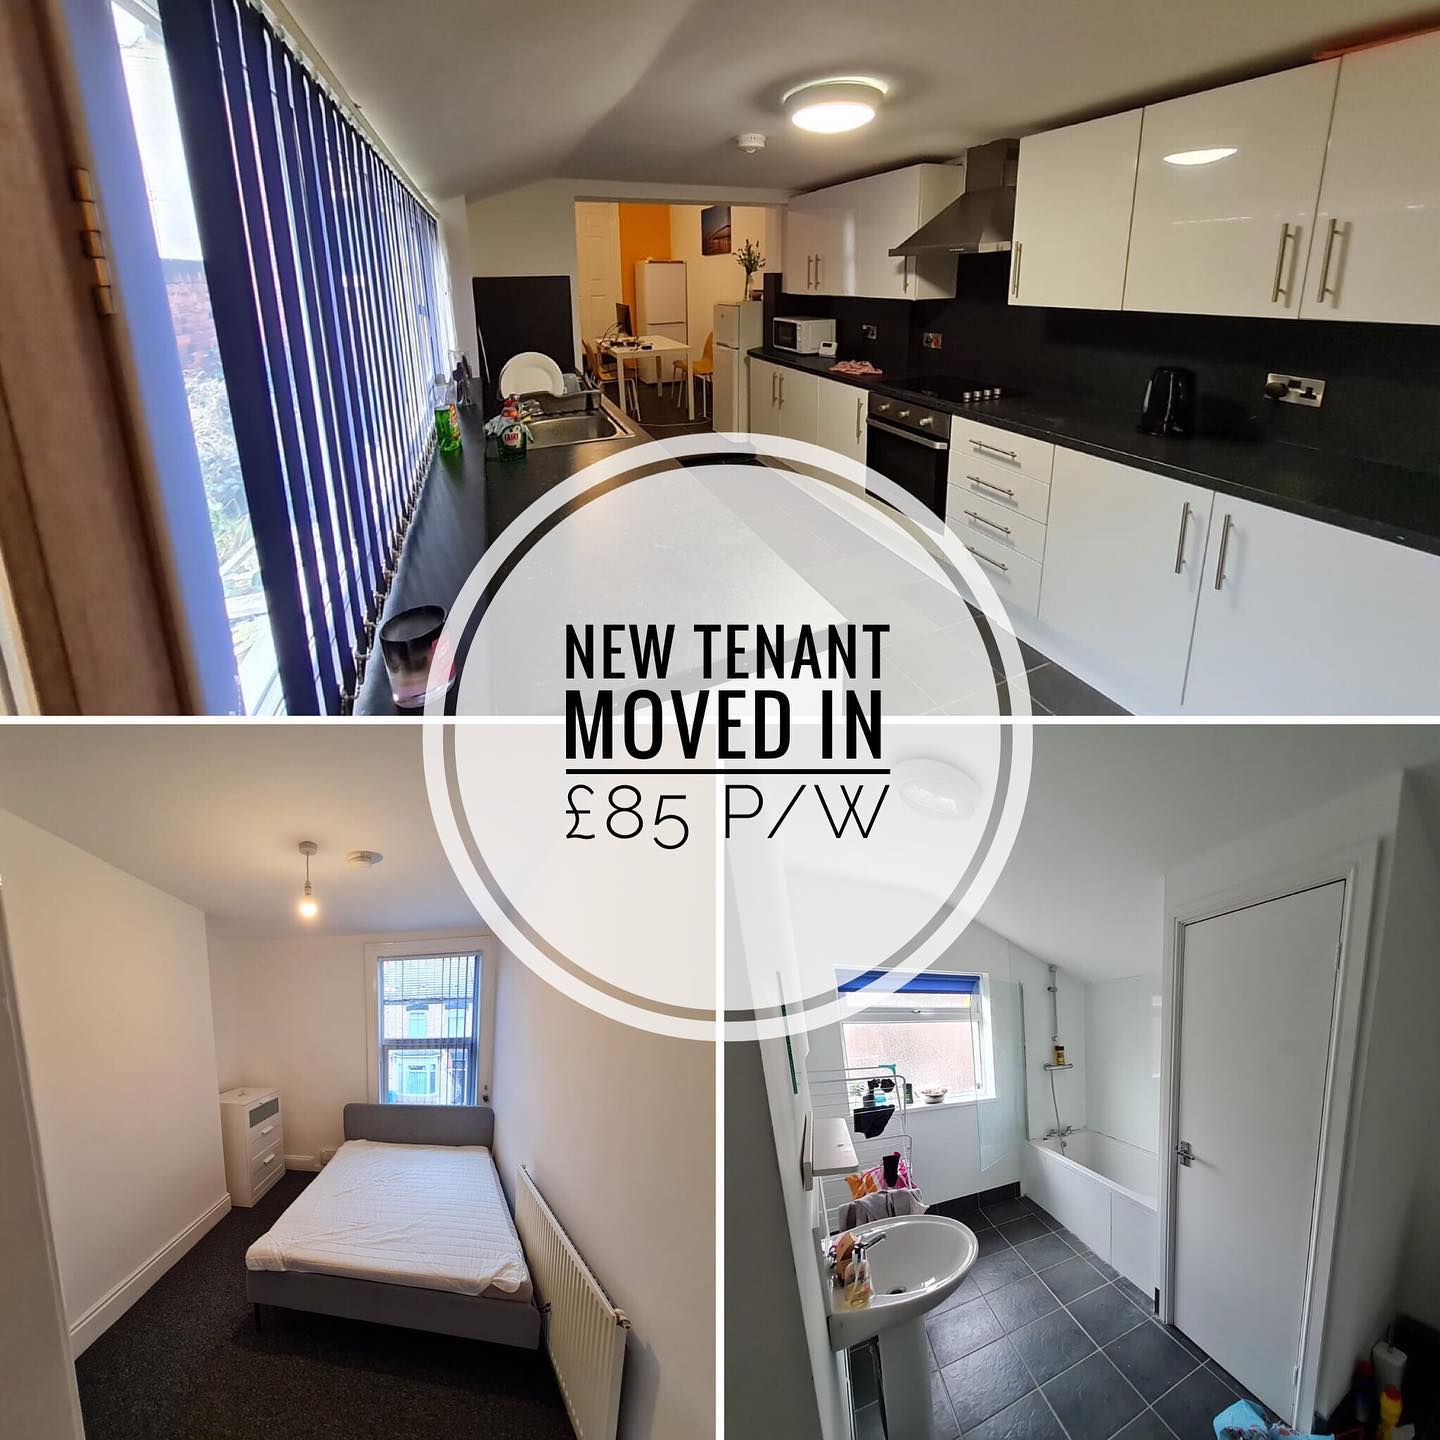 We’ve had a really busy couple of weeks with tons of move-ins! First up this well presented houseshare in #hu5 we still have two bedroom here available, one being an ensuite! Get in touch to view.. rooms from £85p/w all bills included 🛏🛏
#housetorent #houseshare #hull